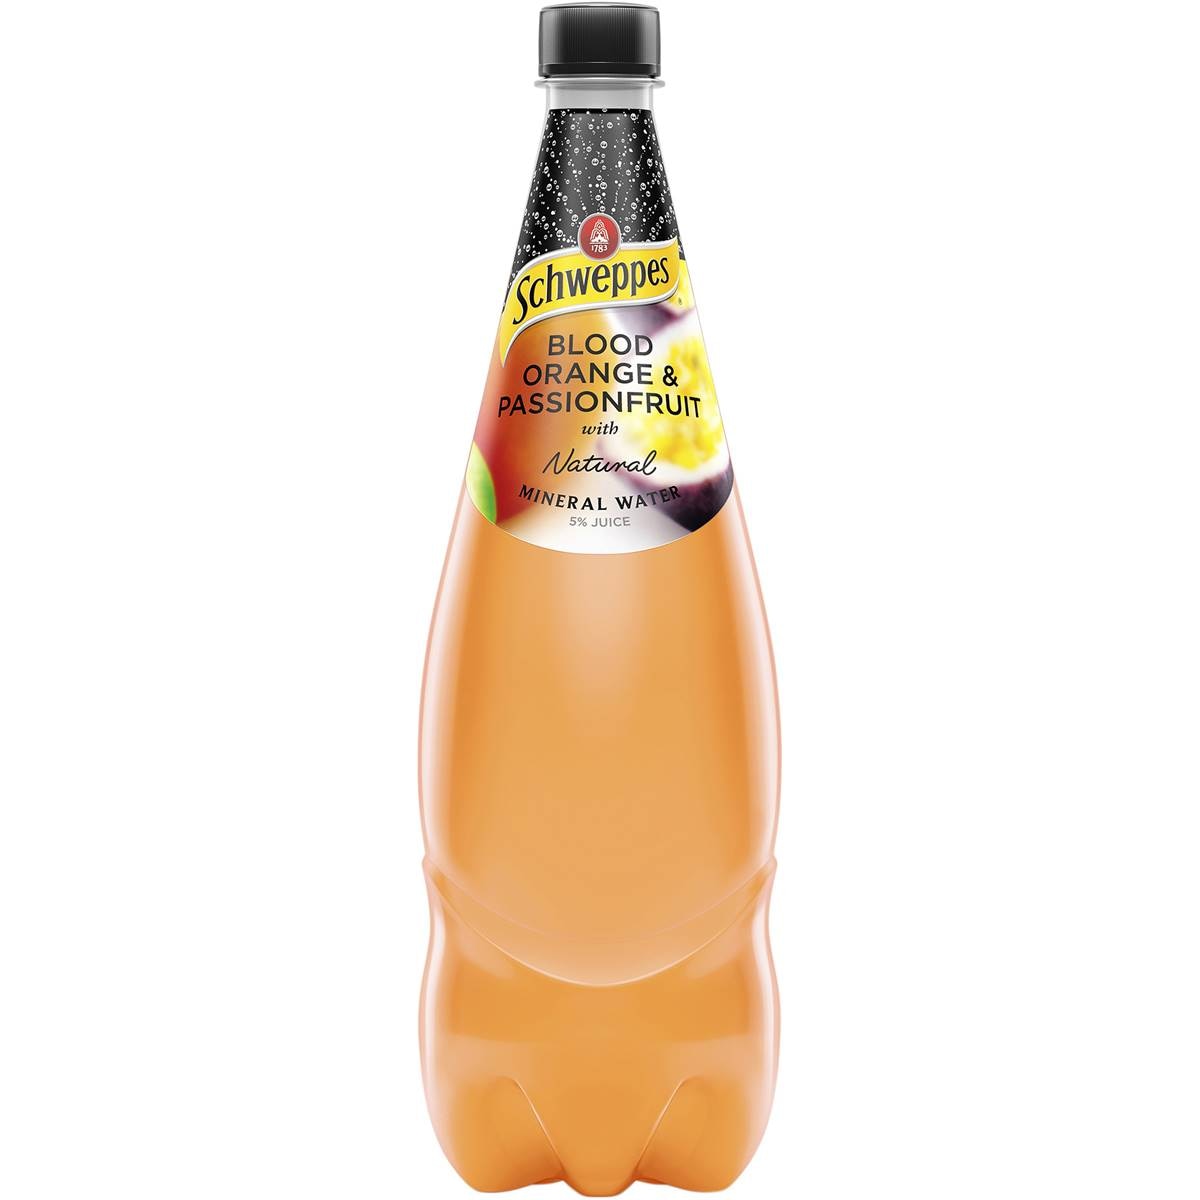 Calories in Schweppes Natural Mineral Water Blood Orange & Passionfruit